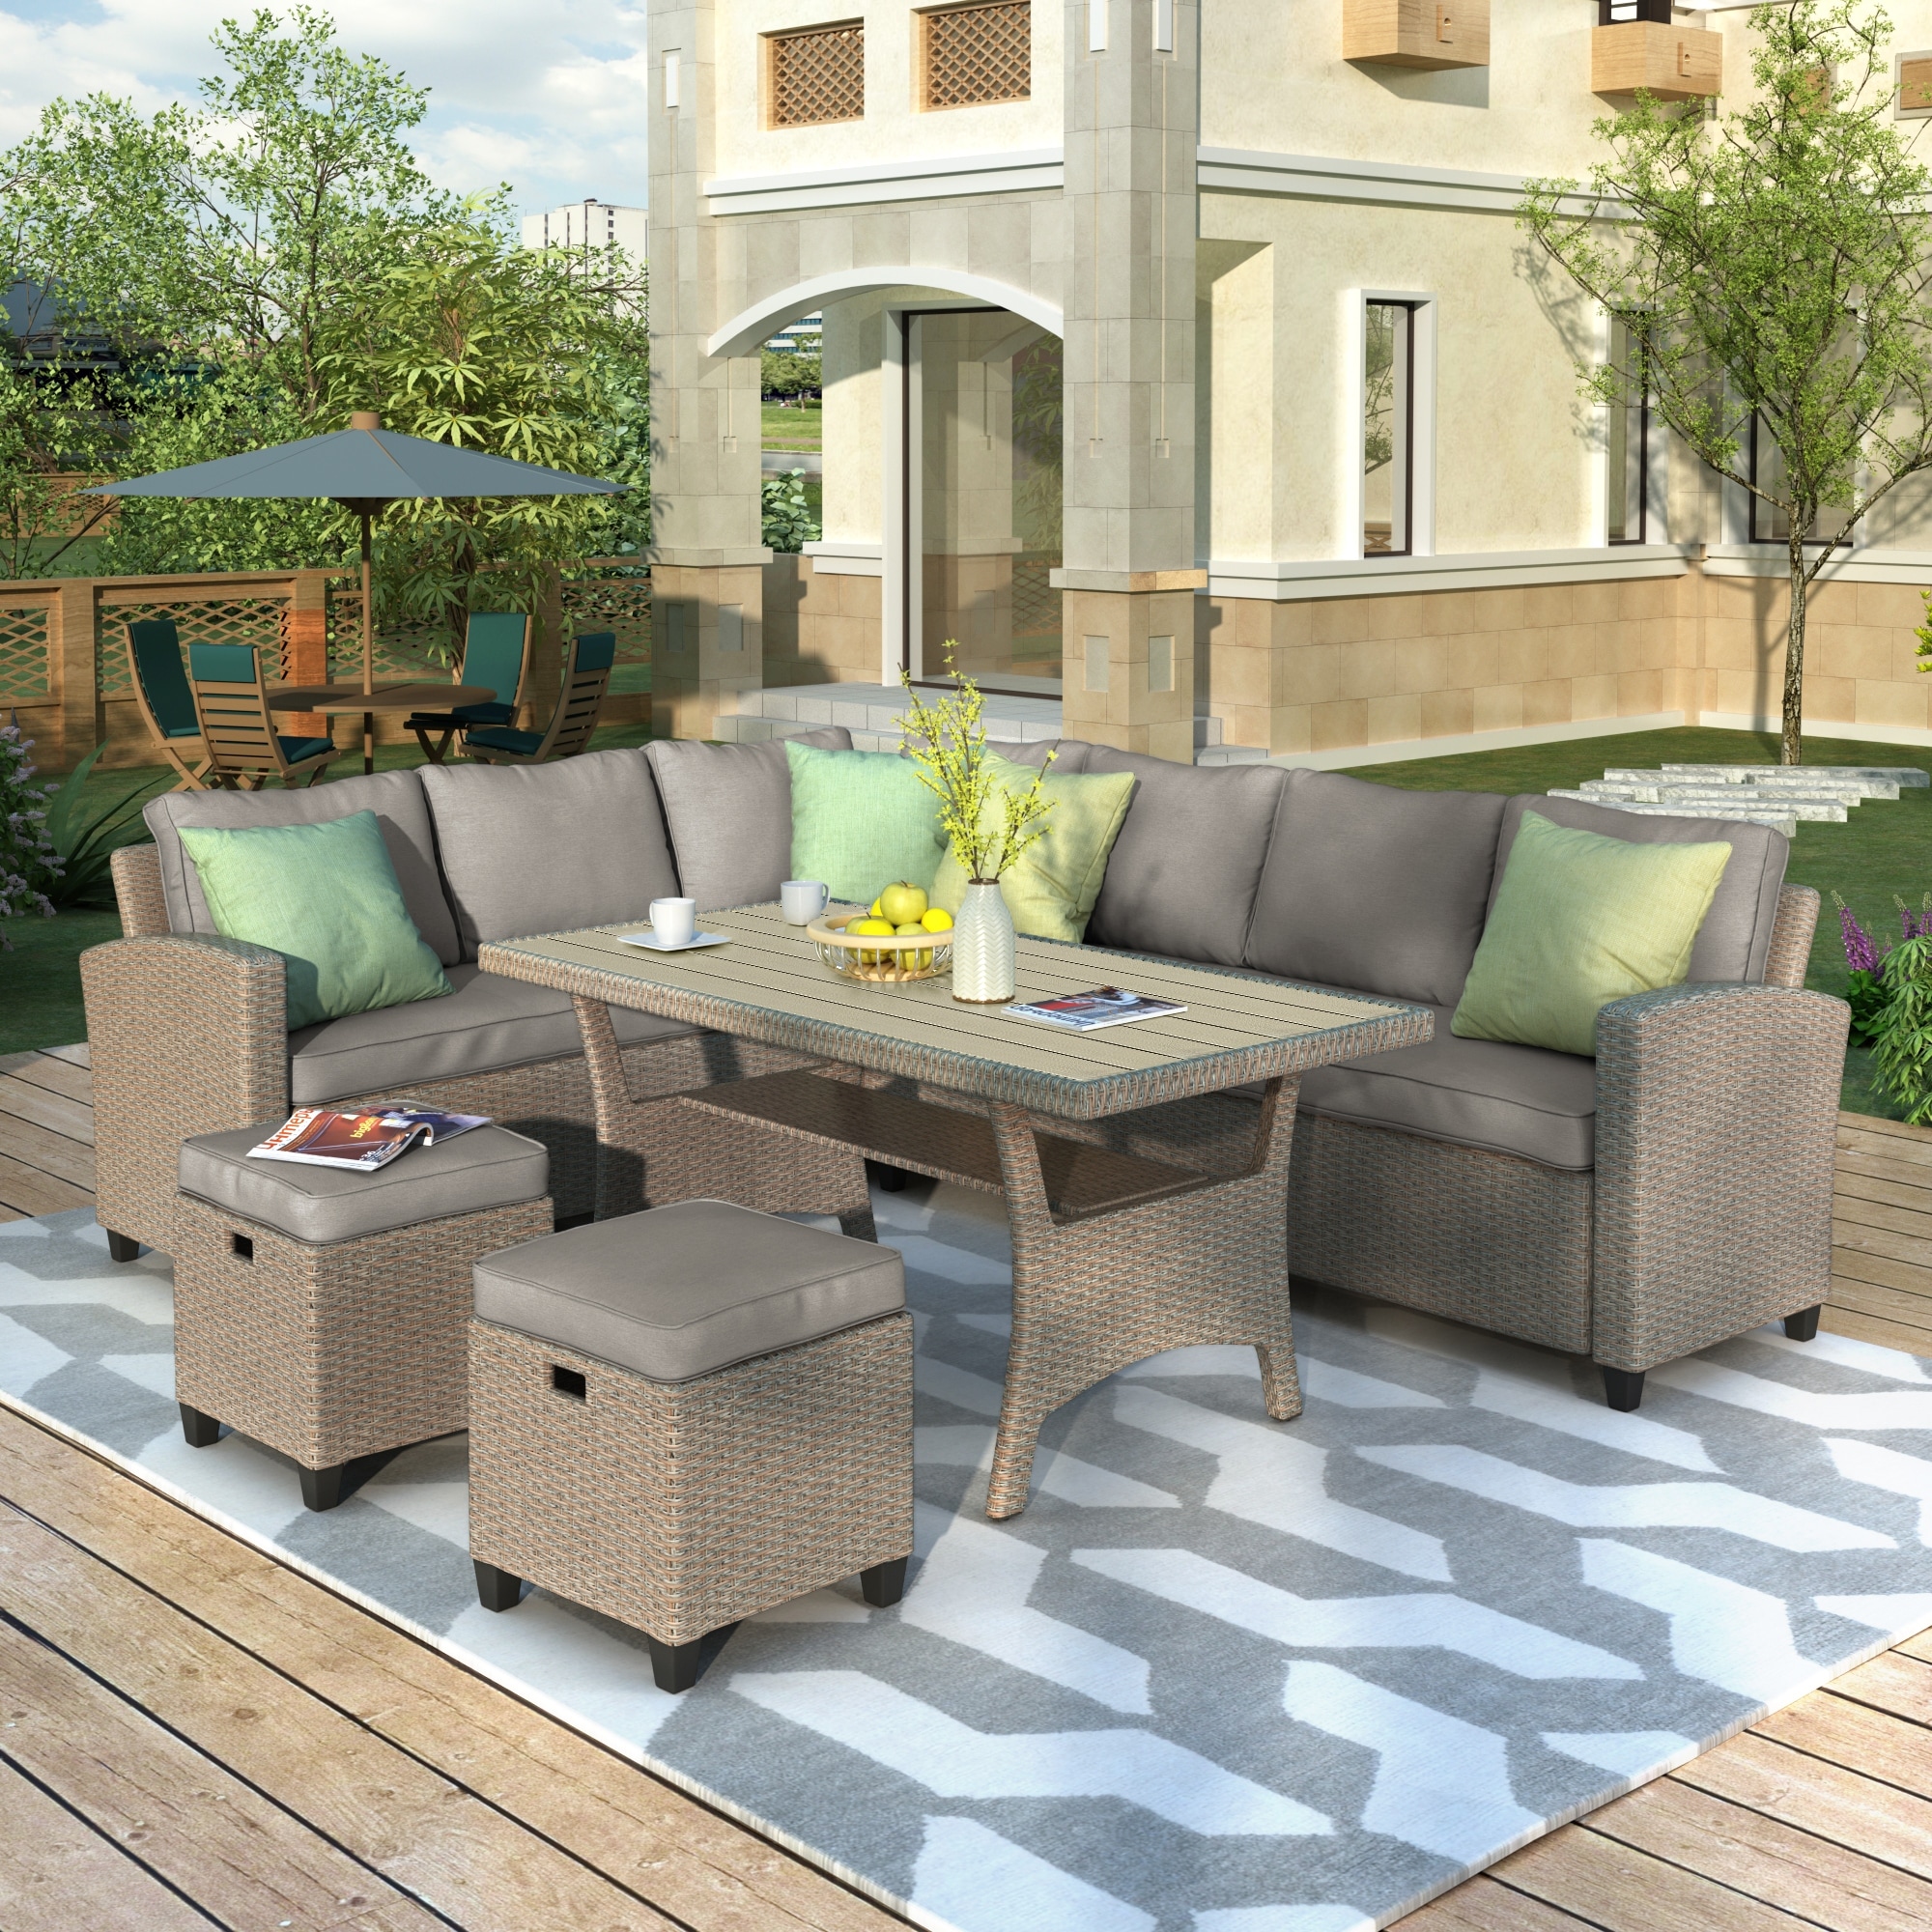 Patio Furniture Sectional Sofa Set 5 Piece Outdoor Conversation Set  Dining Table Chair Set With Ottoman And Throw Pillows